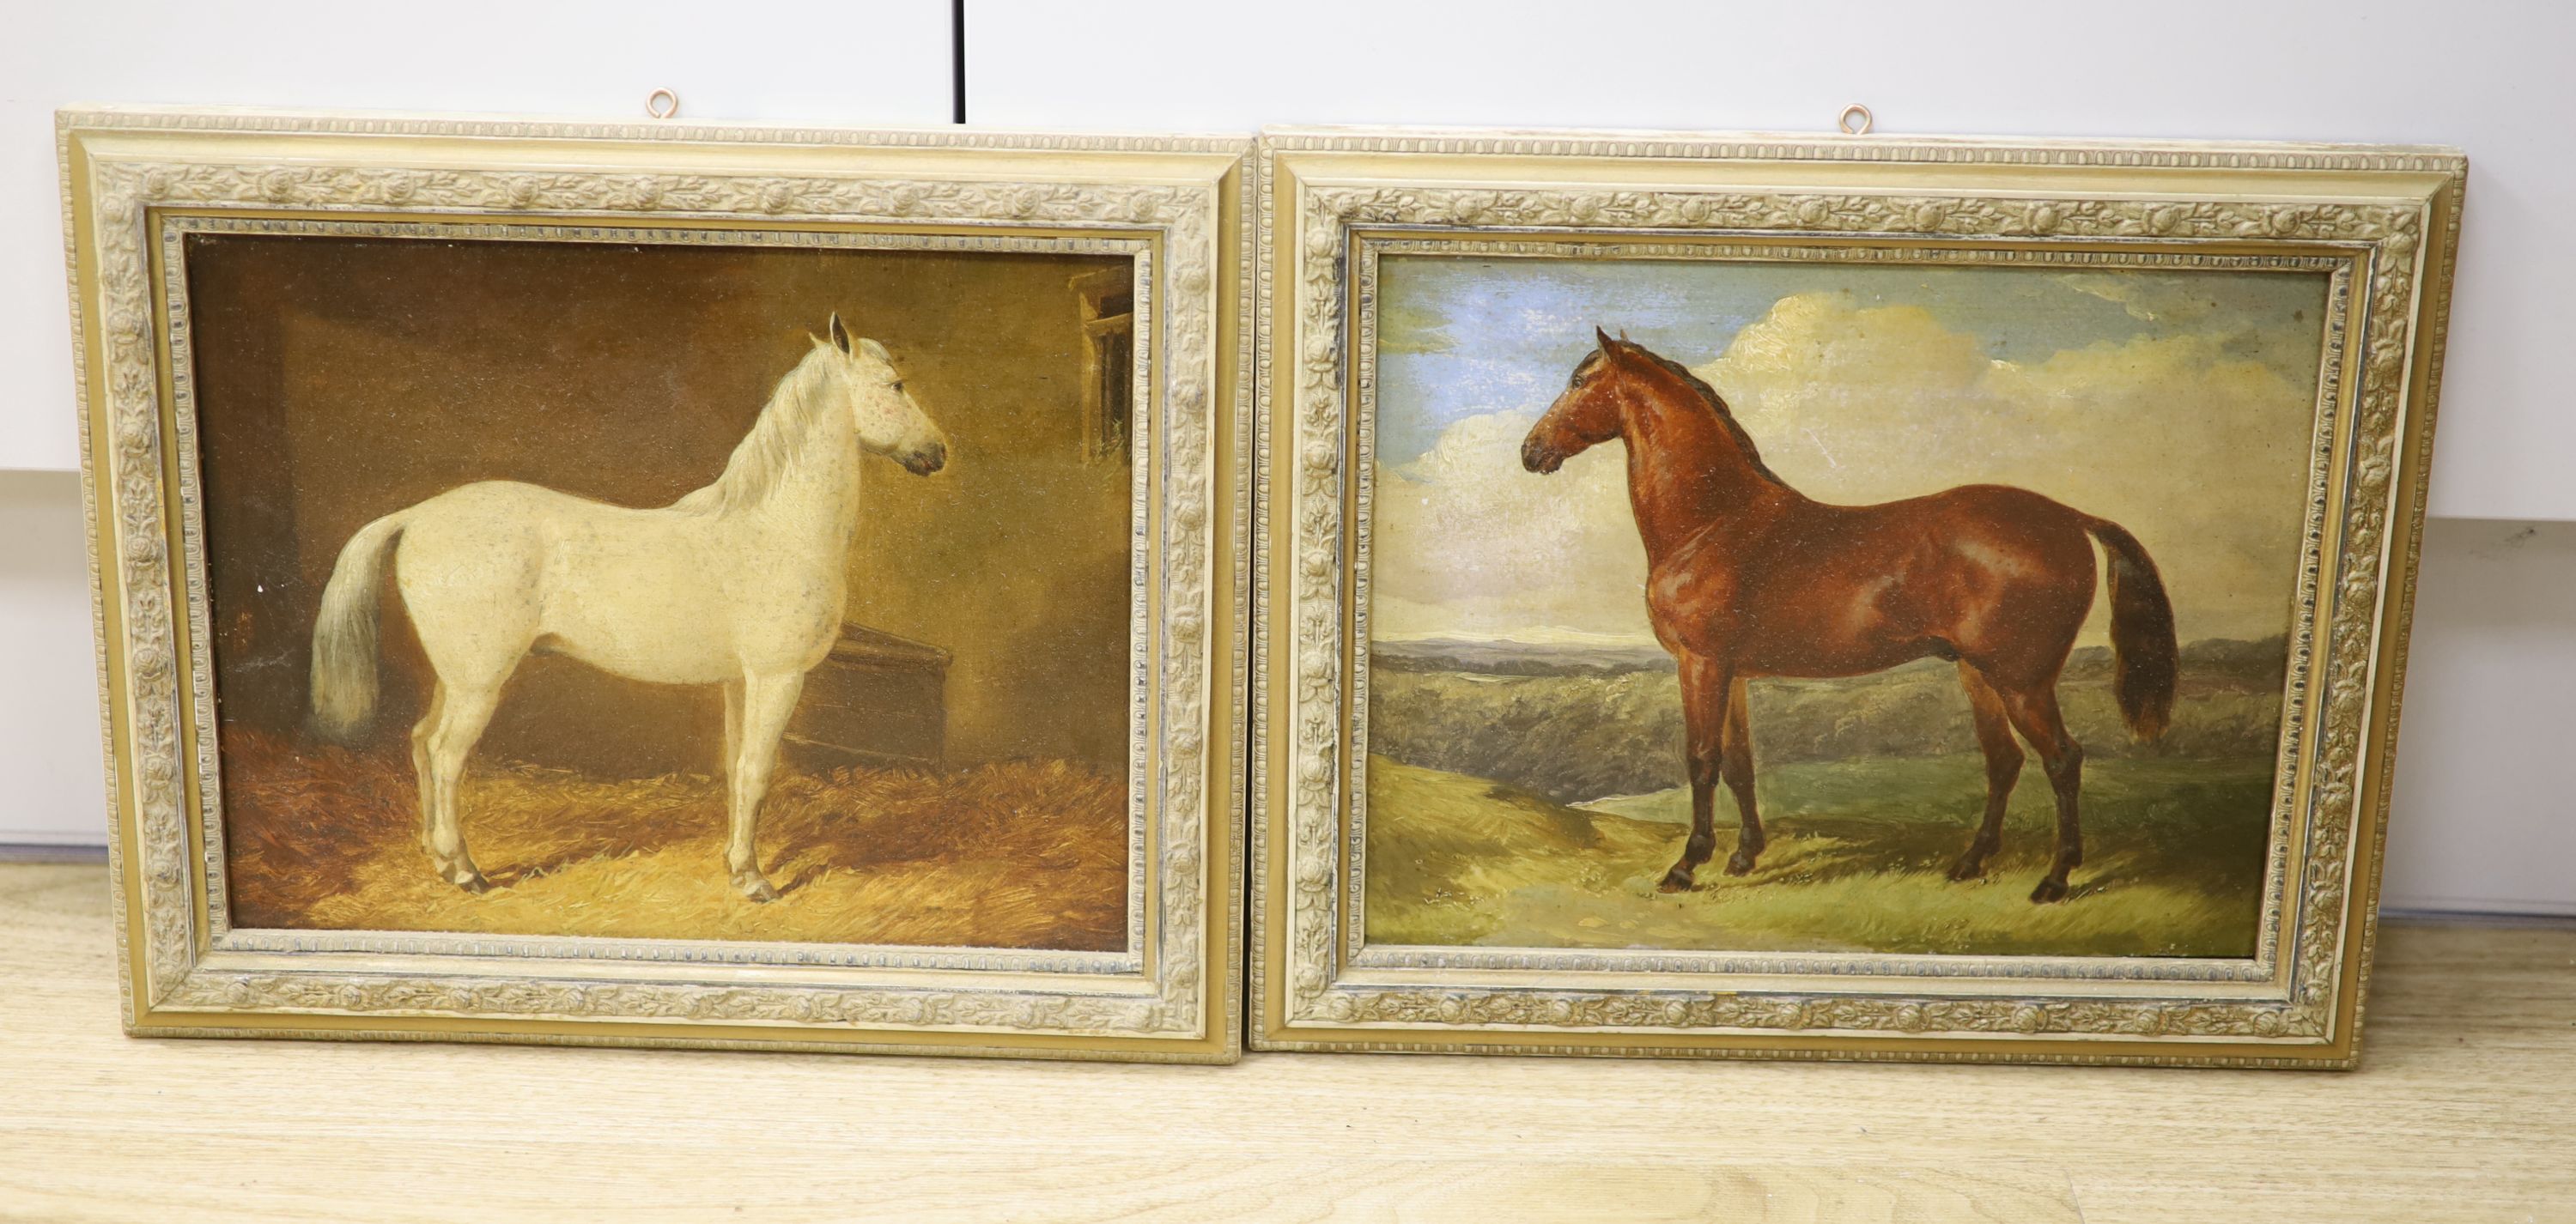 19th century English School, pair of oils on board, Portraits of horses in a stable and a landscape, 19.5 x 24.5cm